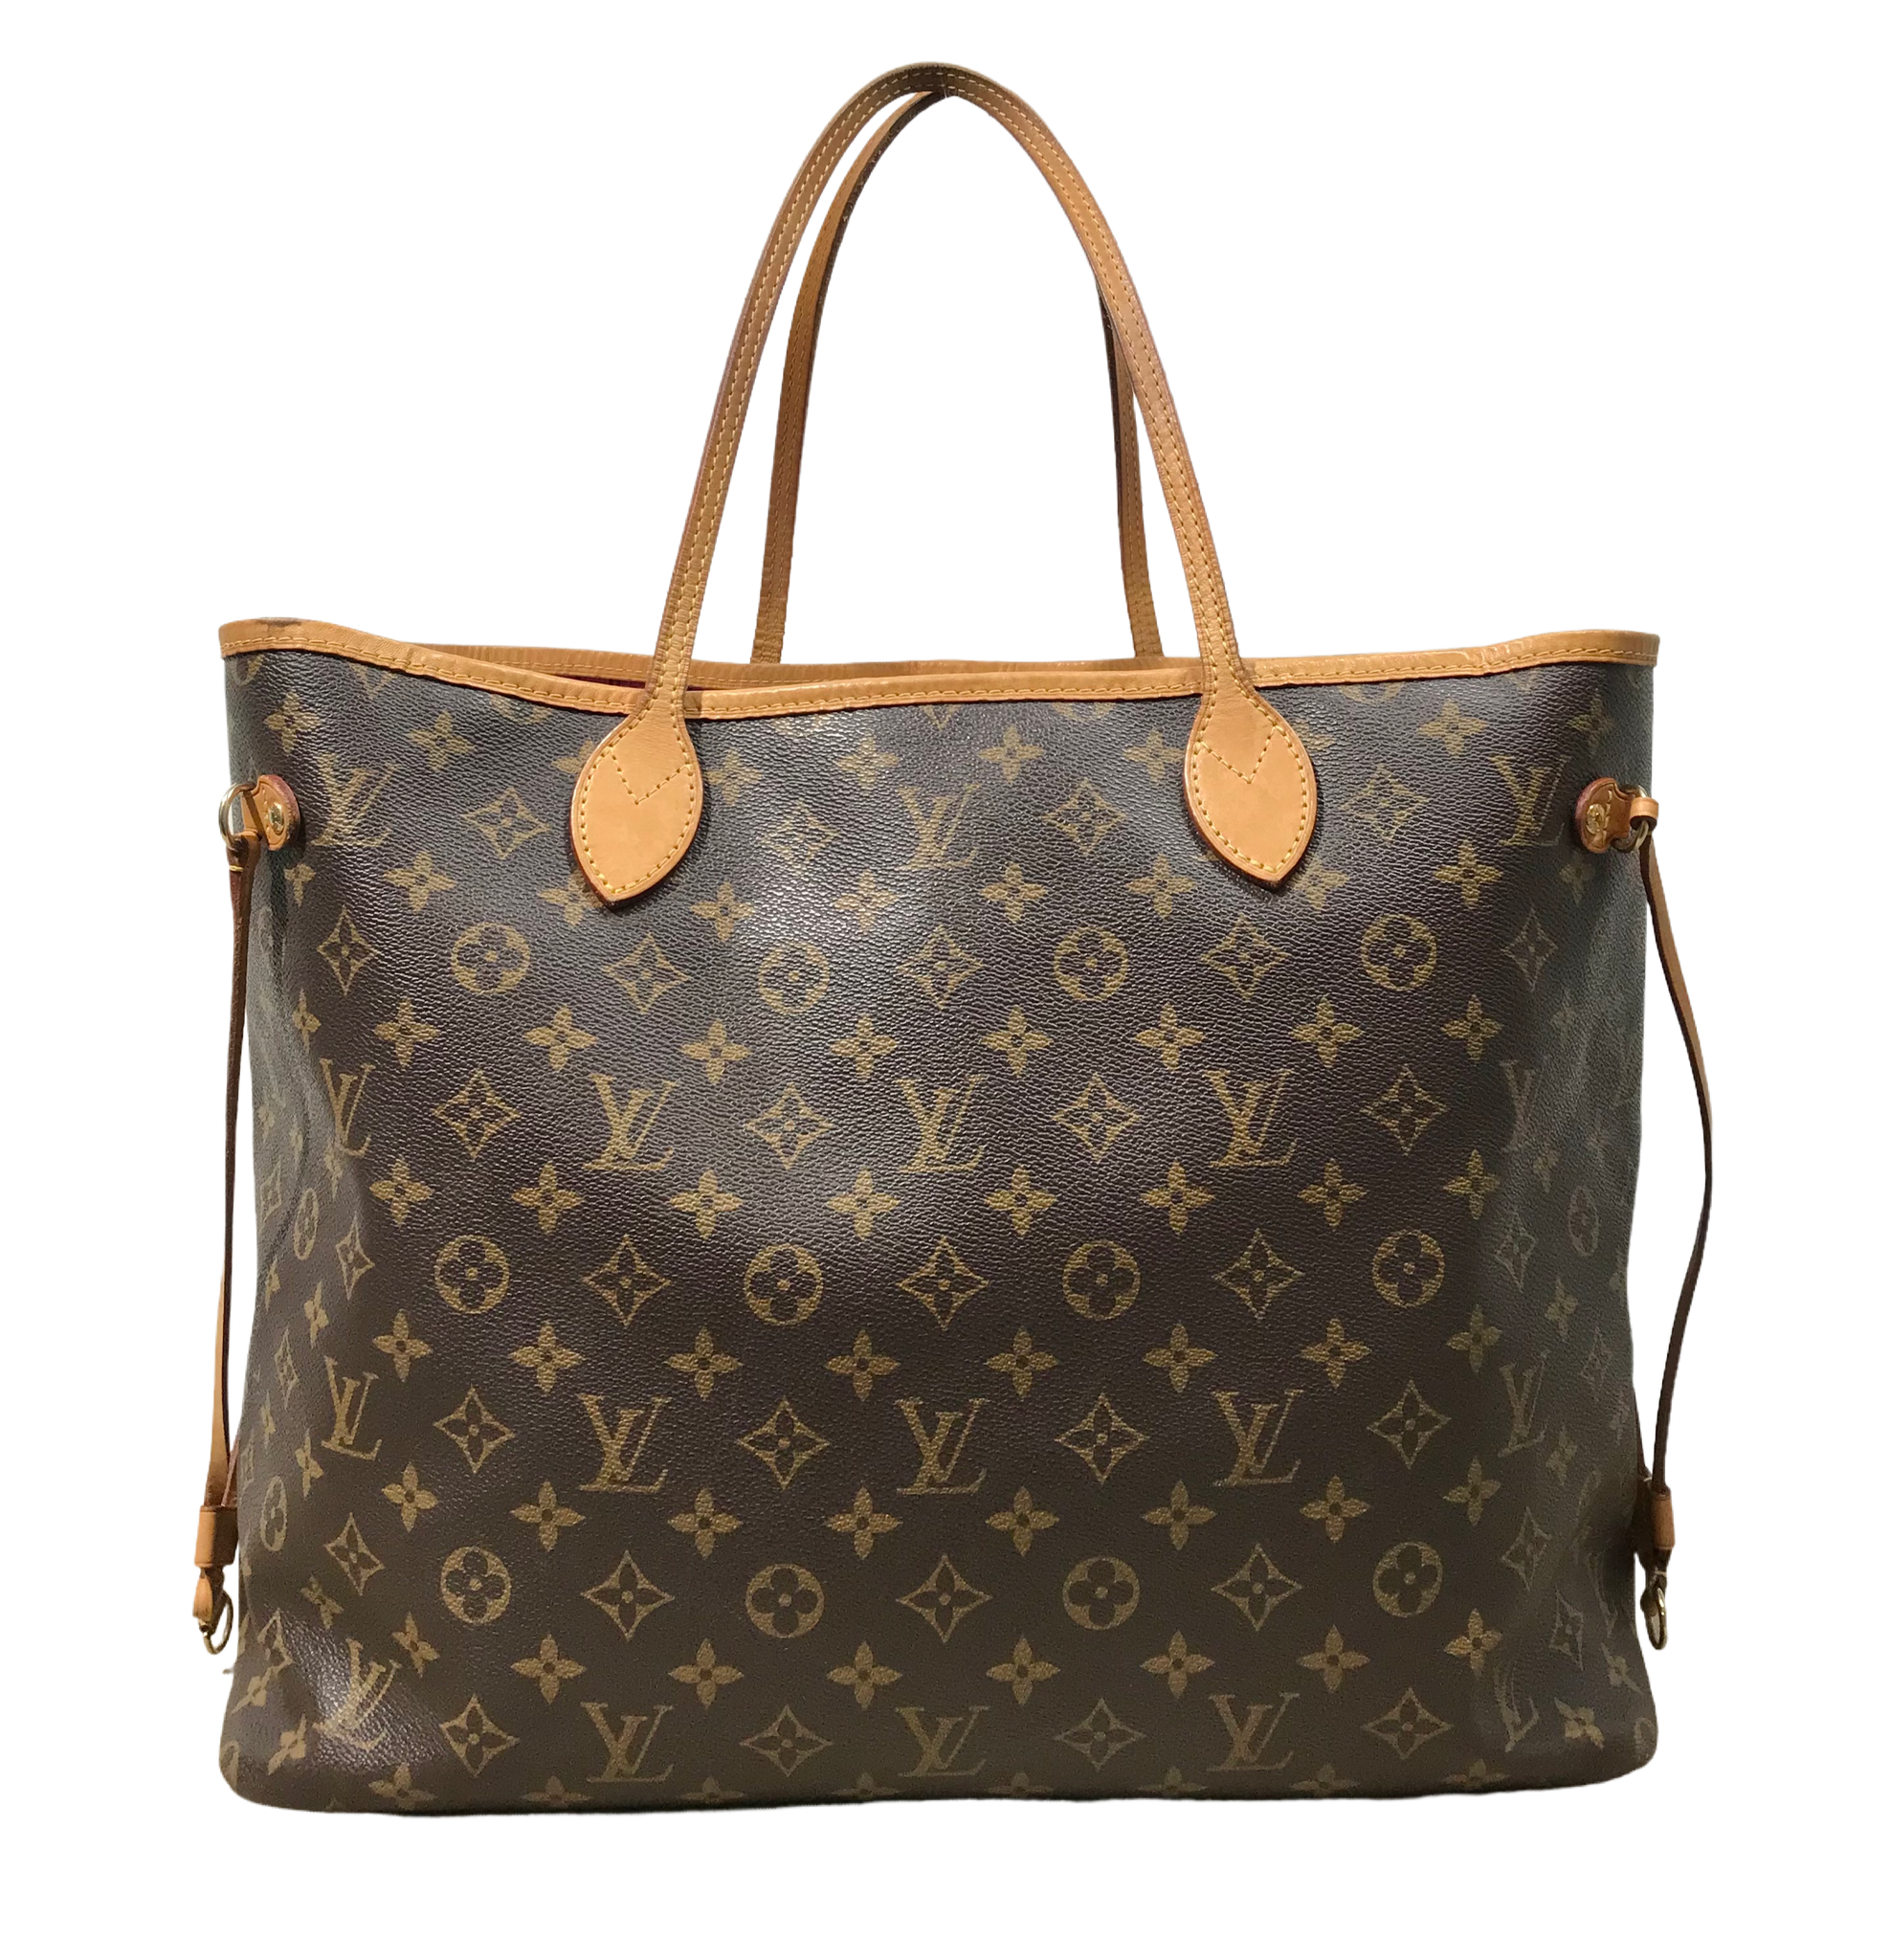 Monogram Neverfull MM with the light pink lining  Louis vuitton, Louis  vuitton bag neverfull, Vuitton